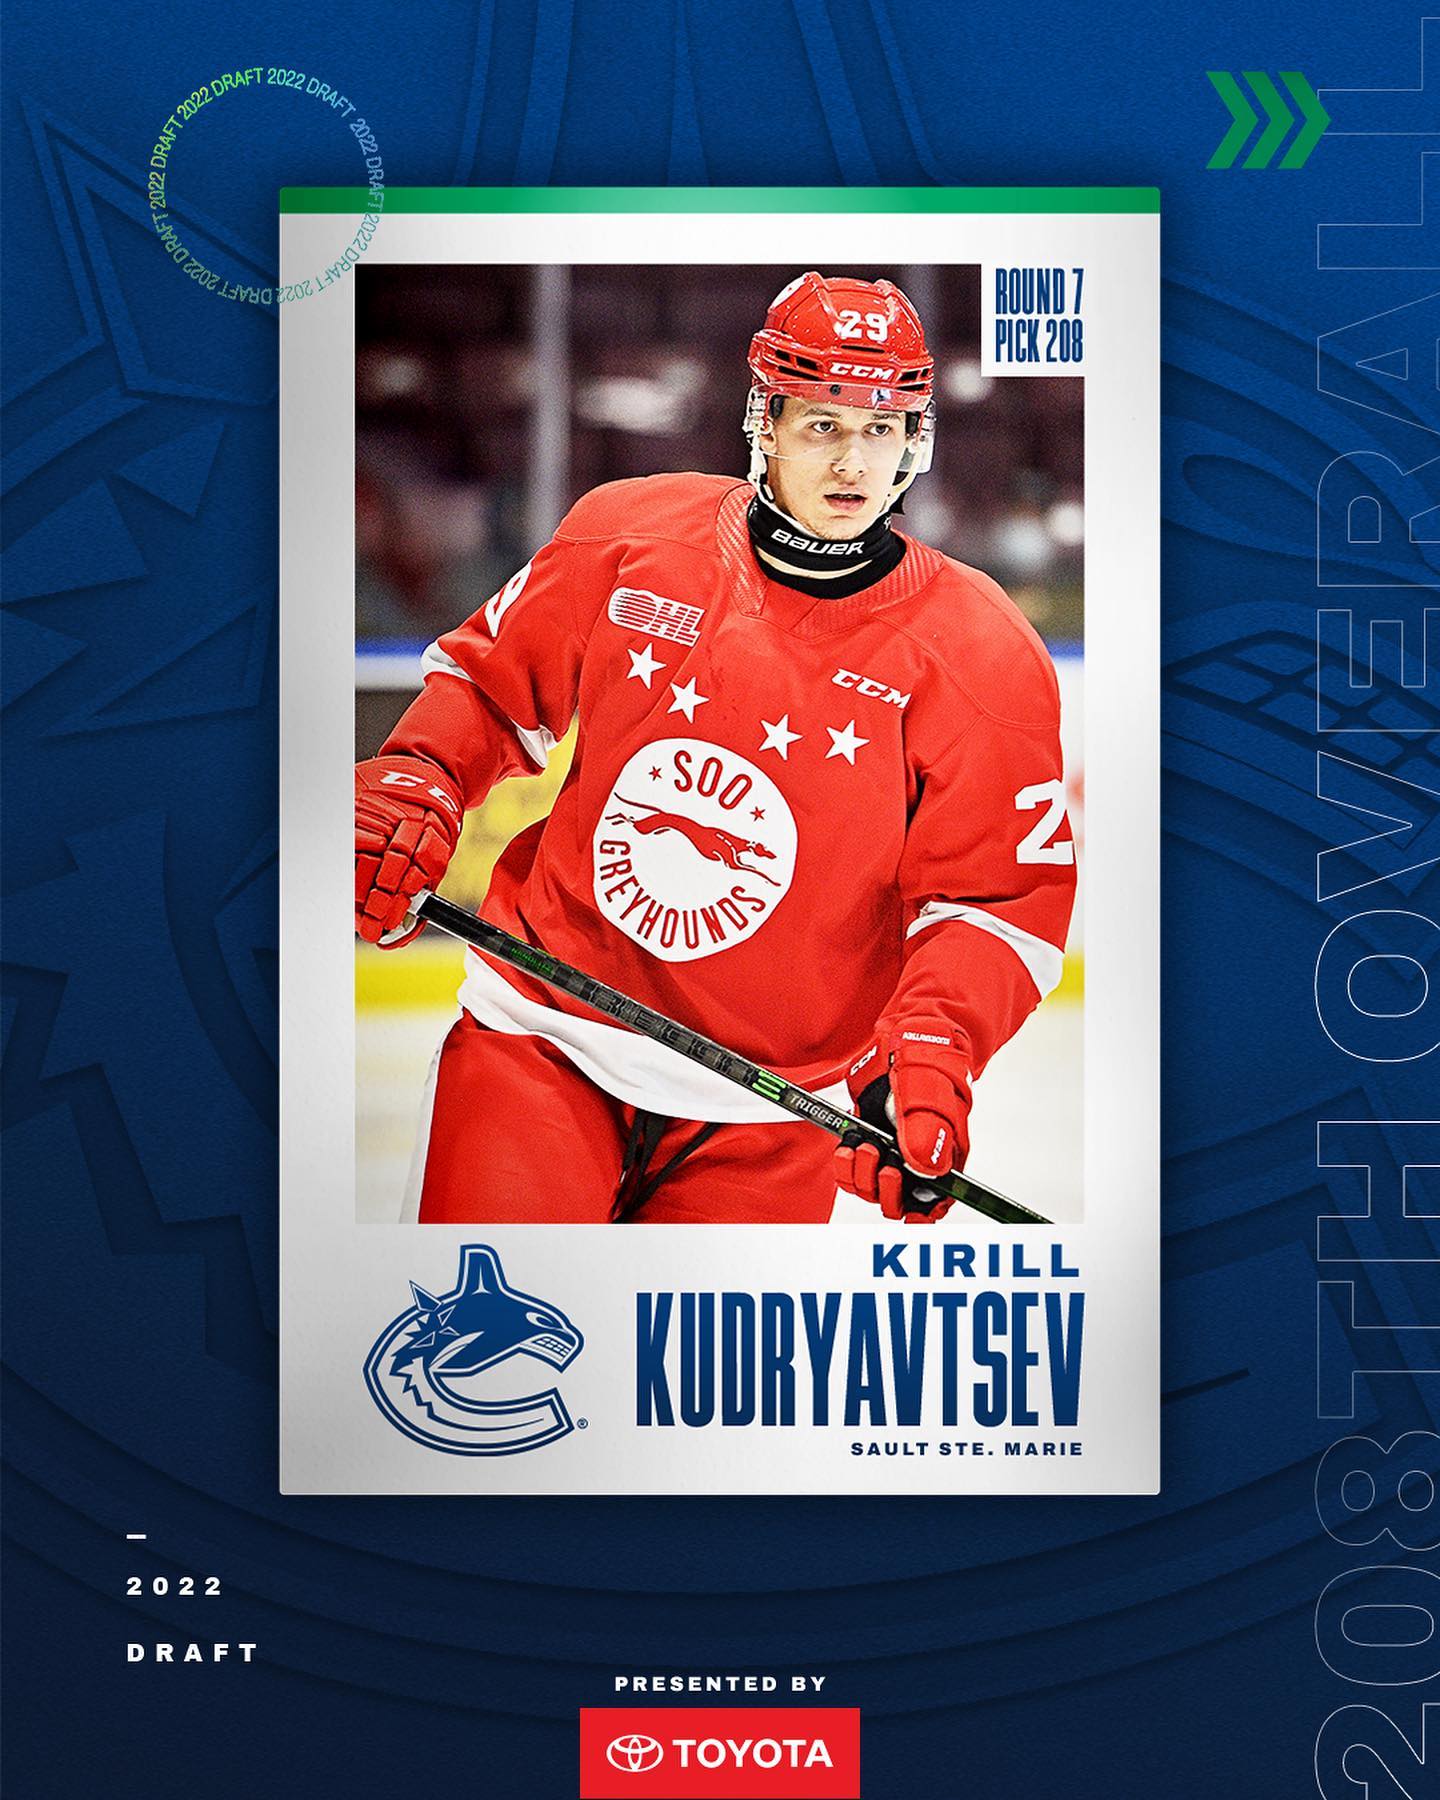 And with our final pick of the 2022 #NHLDraft, we select Kirill Kudryavtsev!...